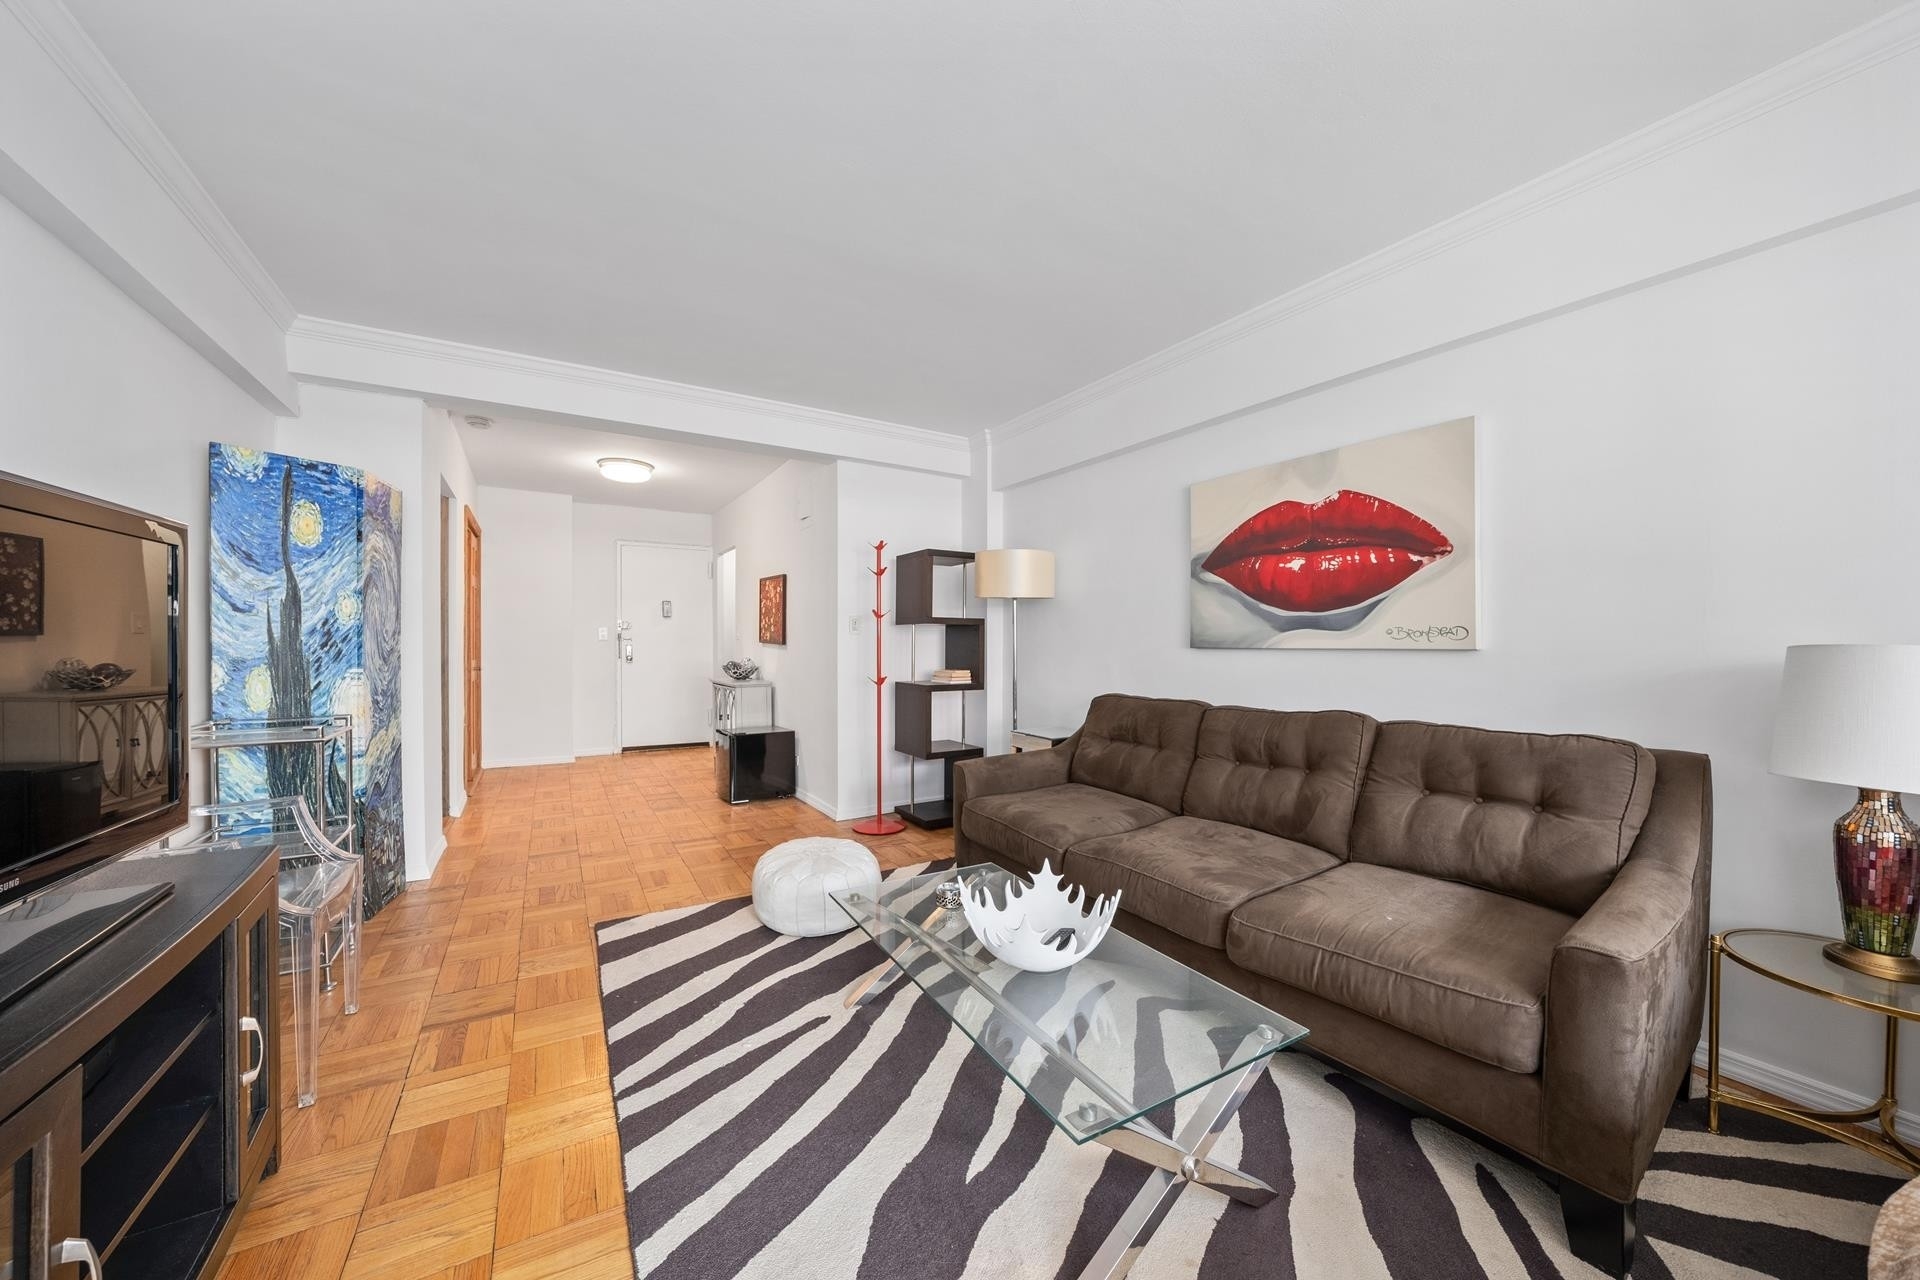 Co-op Properties for Sale at 210 E 36TH ST, 9G Murray Hill, New York, New York 10016